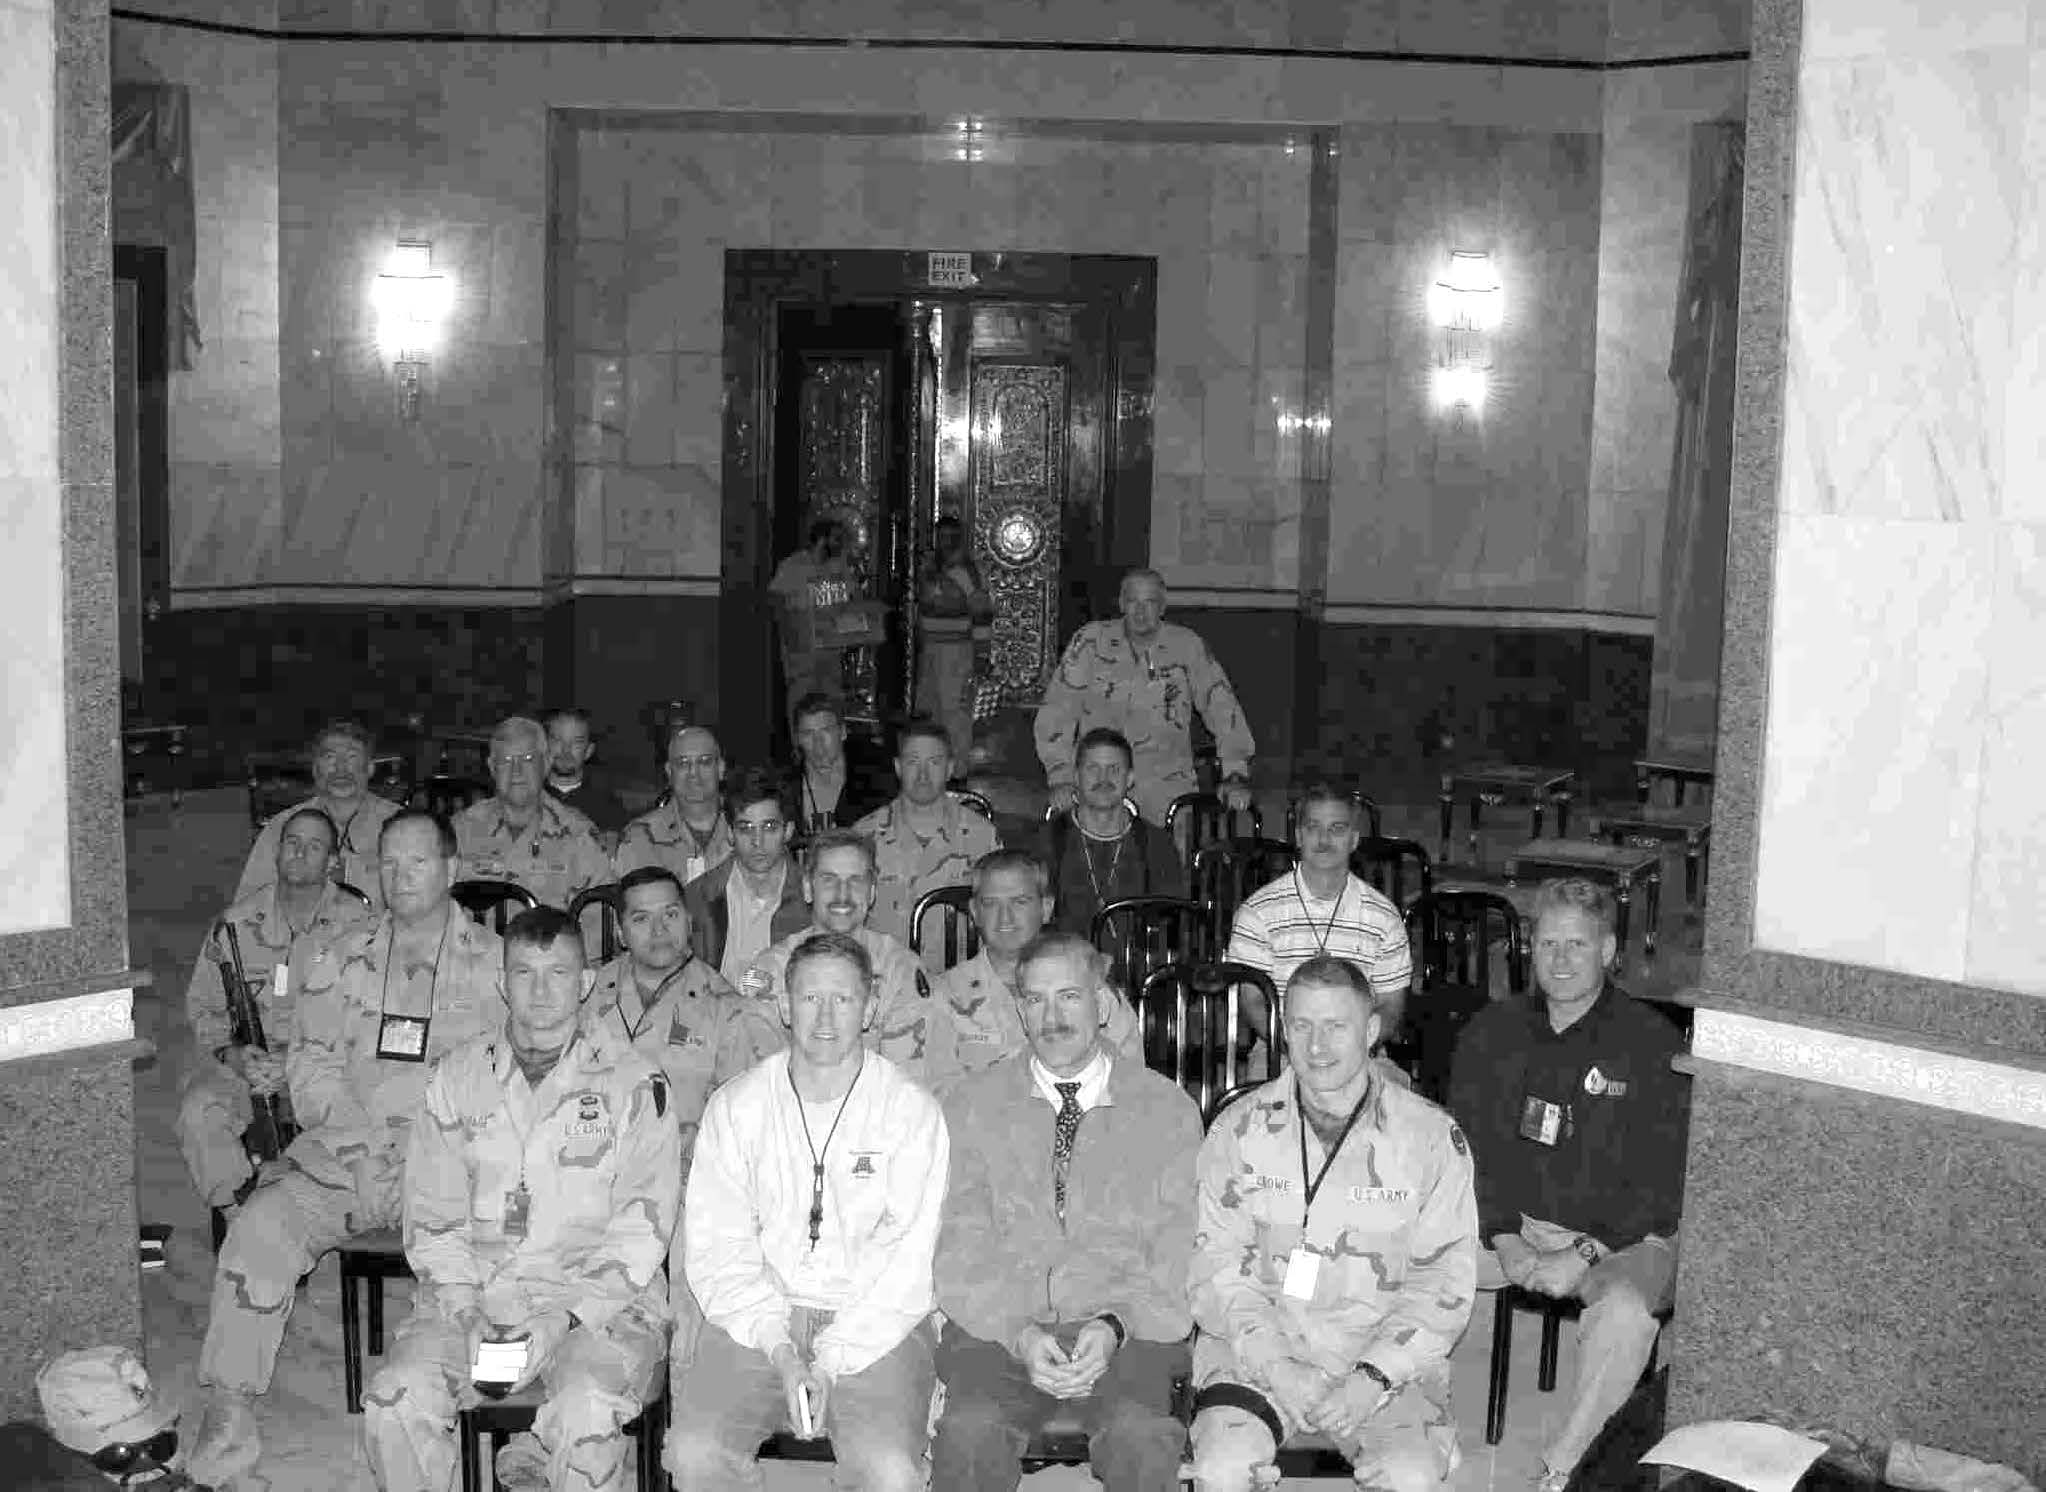 During December 2003, Church meetings in Baghdad, Iraq, were held in Saddam Hussein’s former presidential palace. Courtesy of Kevin R. Riedler (second from right on the front row).